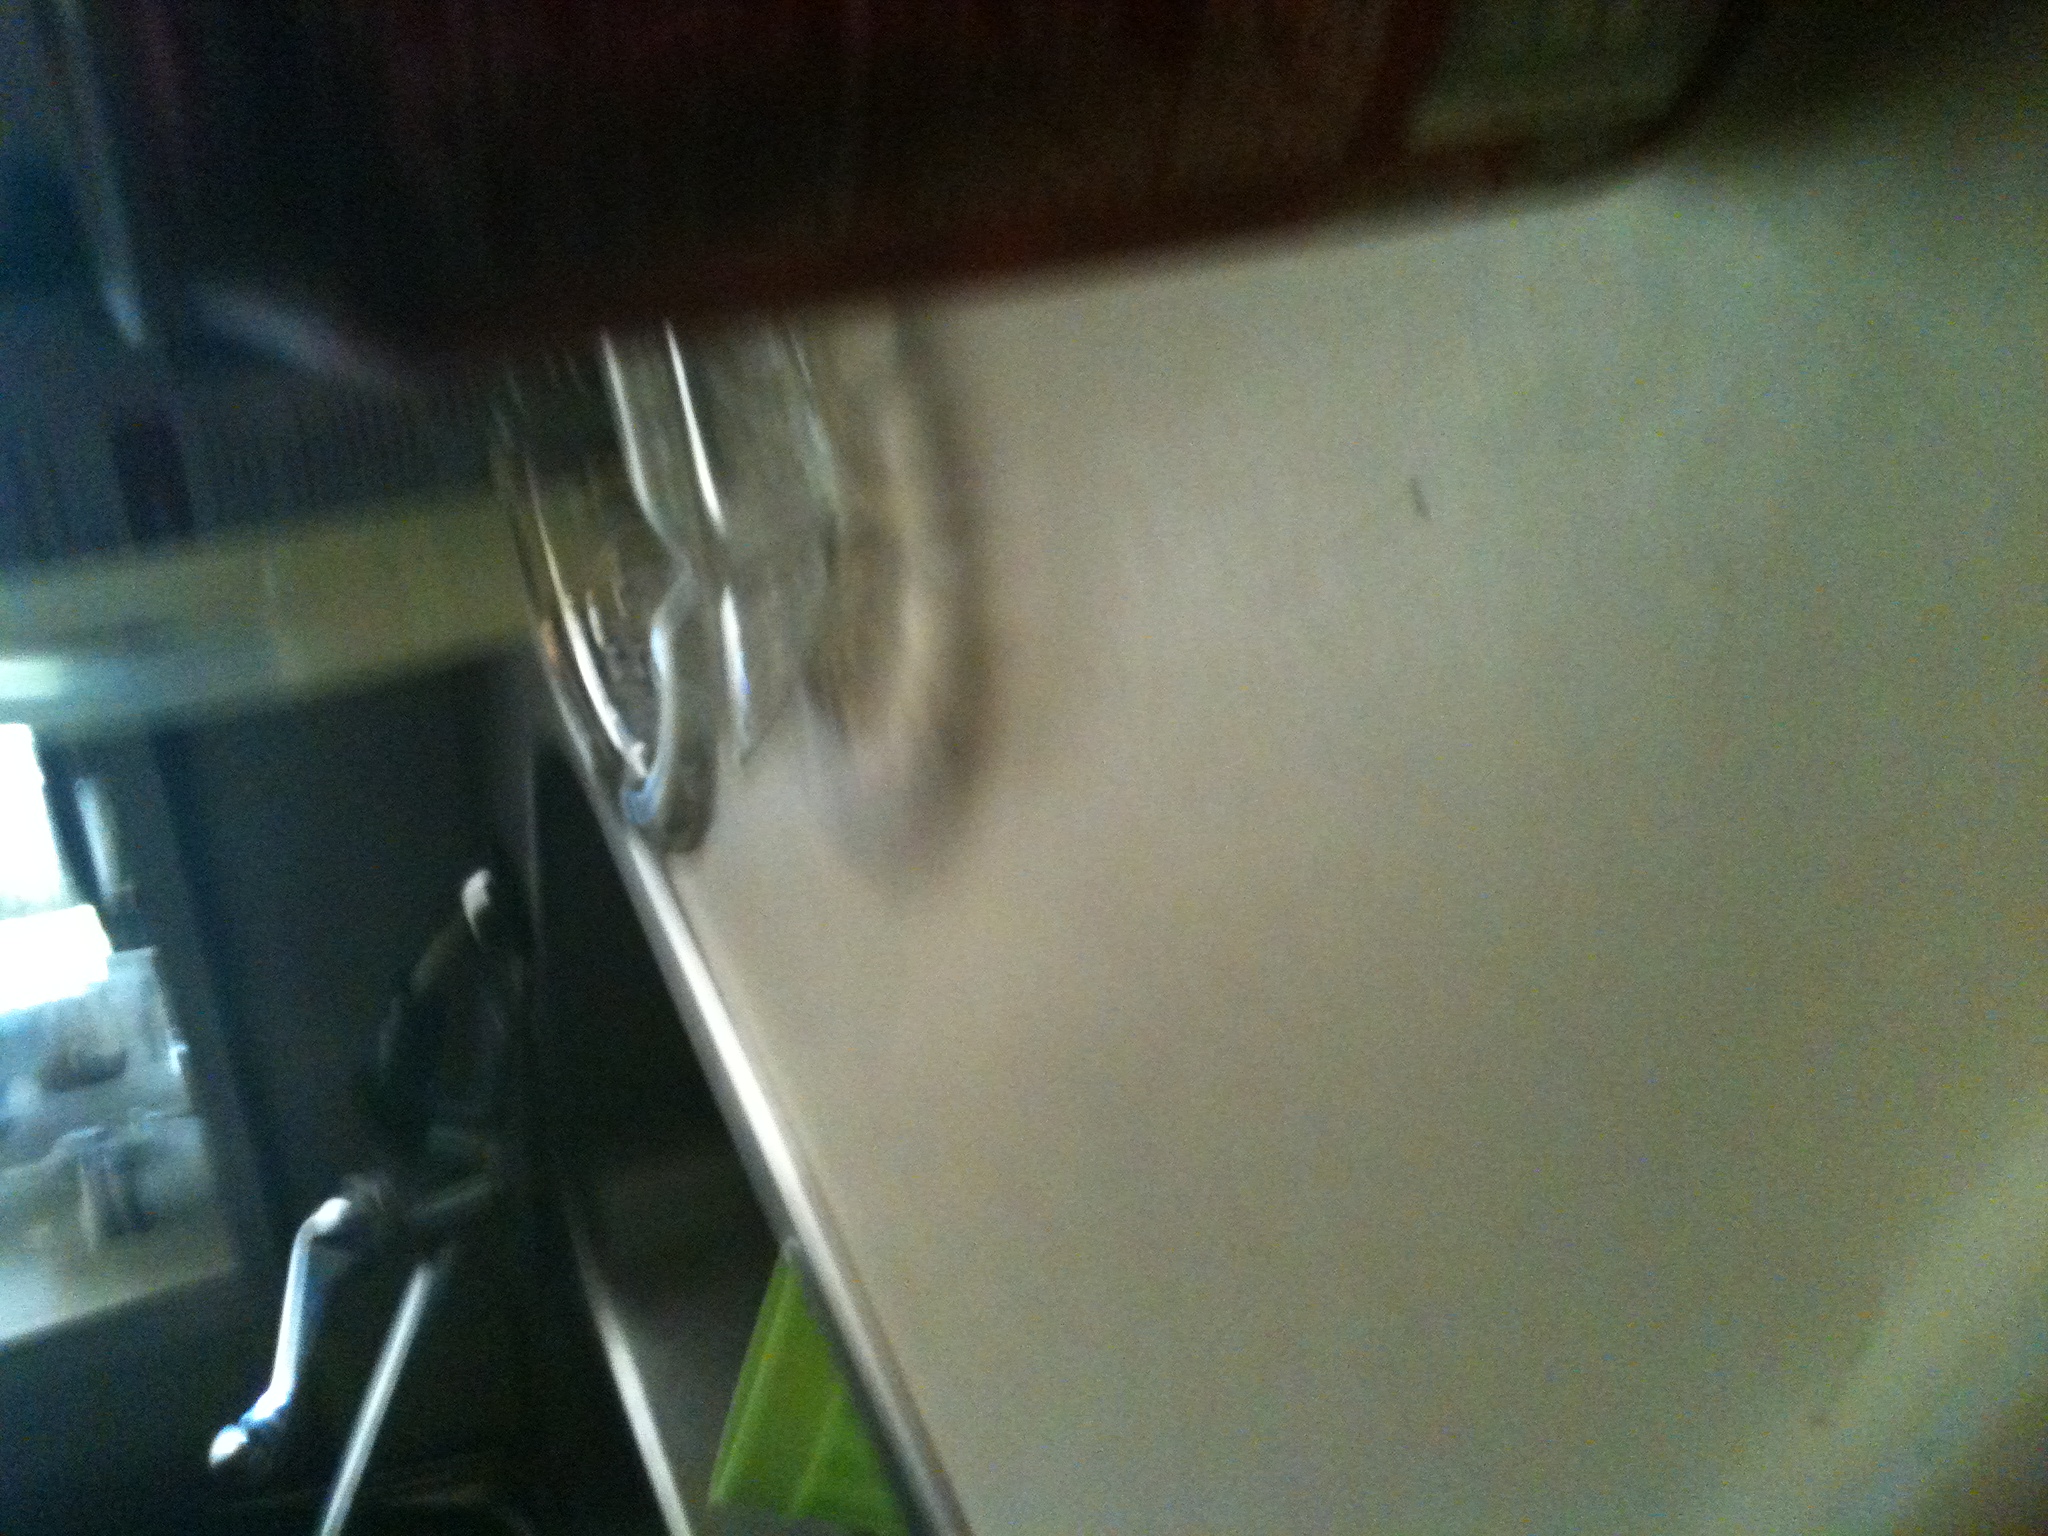 A photo captured by a person who is blind. A computer-generated caption for this photo is: A close up of a sink in a mirror.